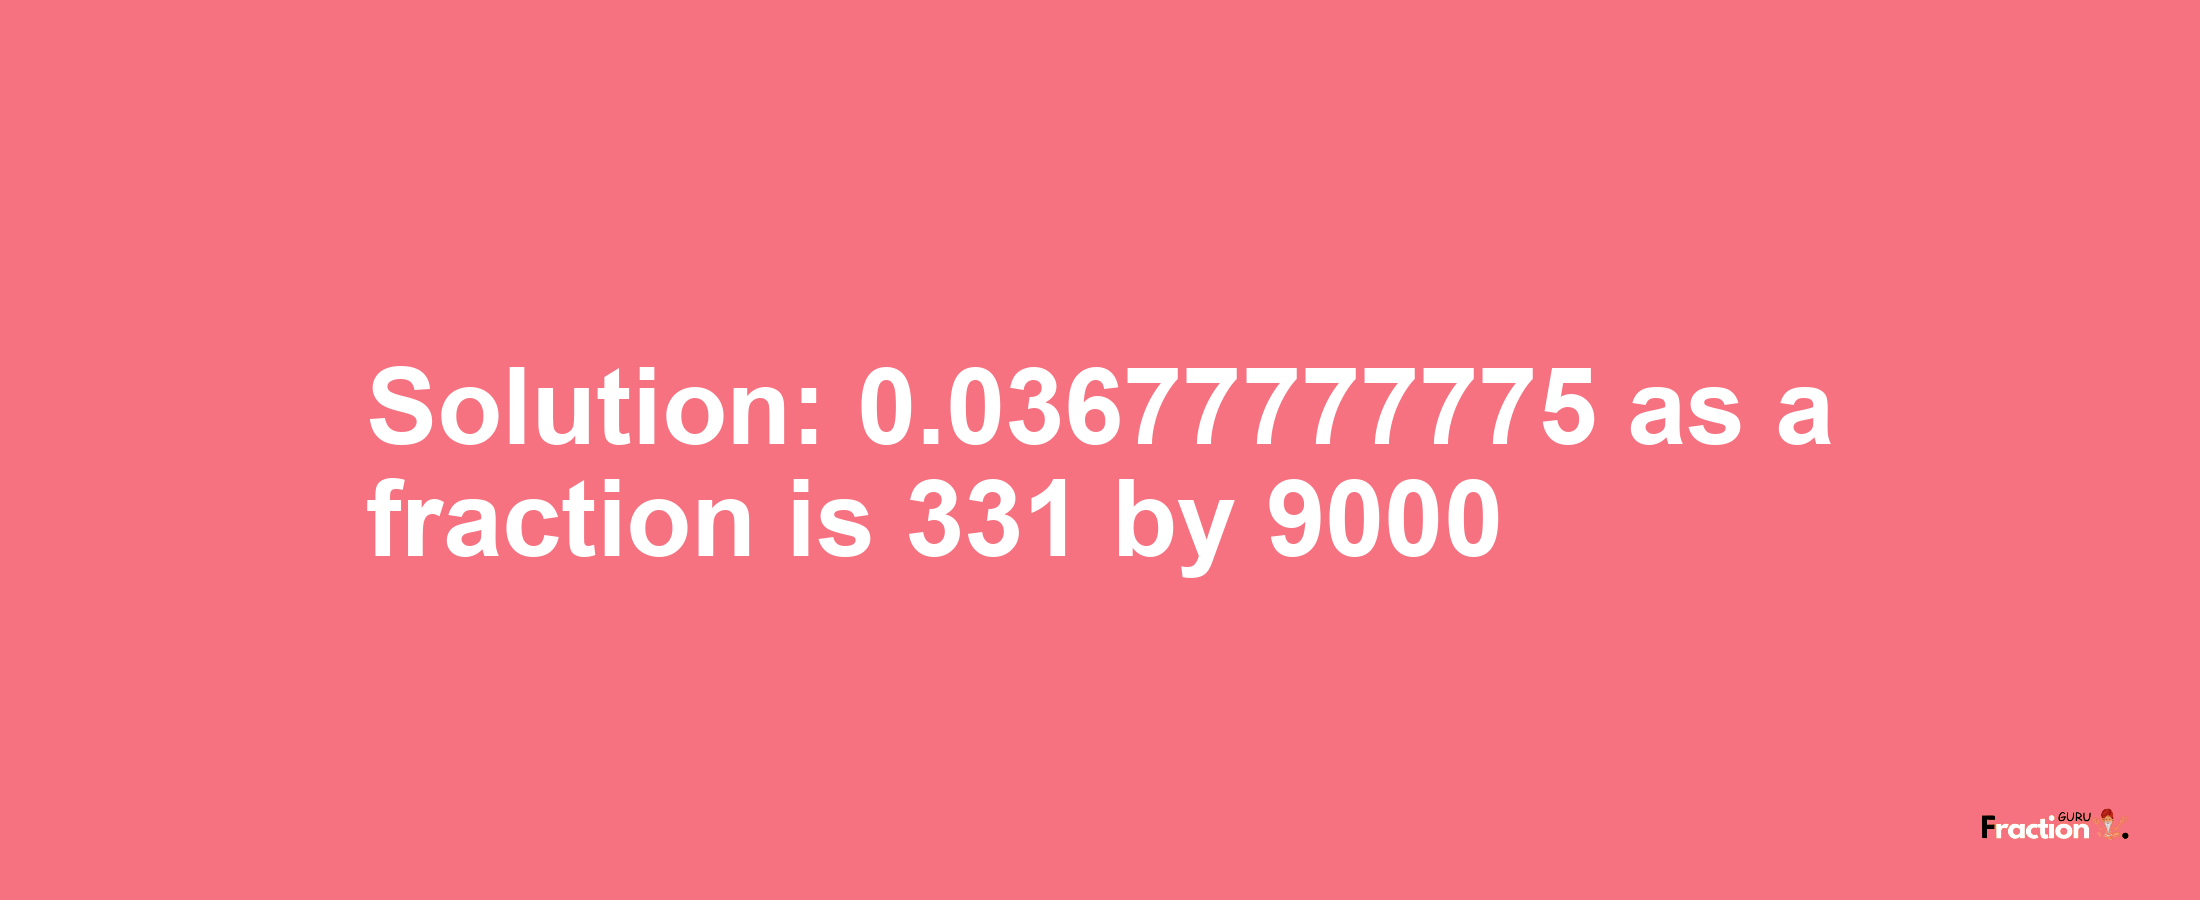 Solution:0.03677777775 as a fraction is 331/9000